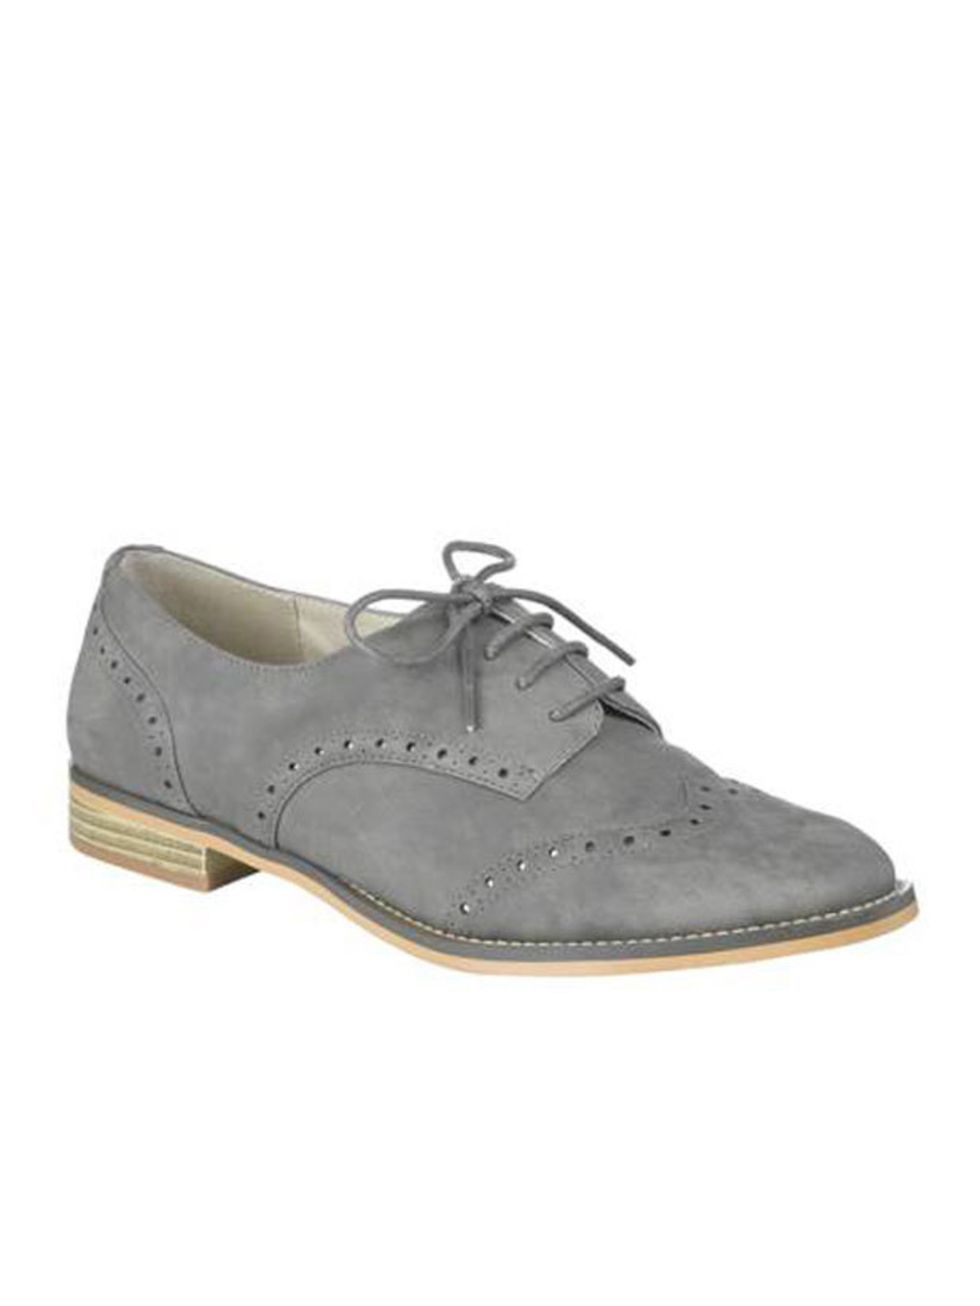 <p>Old-school brogues are a firm favourite in the ELLE office and we want to add these to our collection. The pretty grey suede is a chic alternative to brown and black and will work with just about anything. Marks &amp; Spencer brogues, £25, for stockist